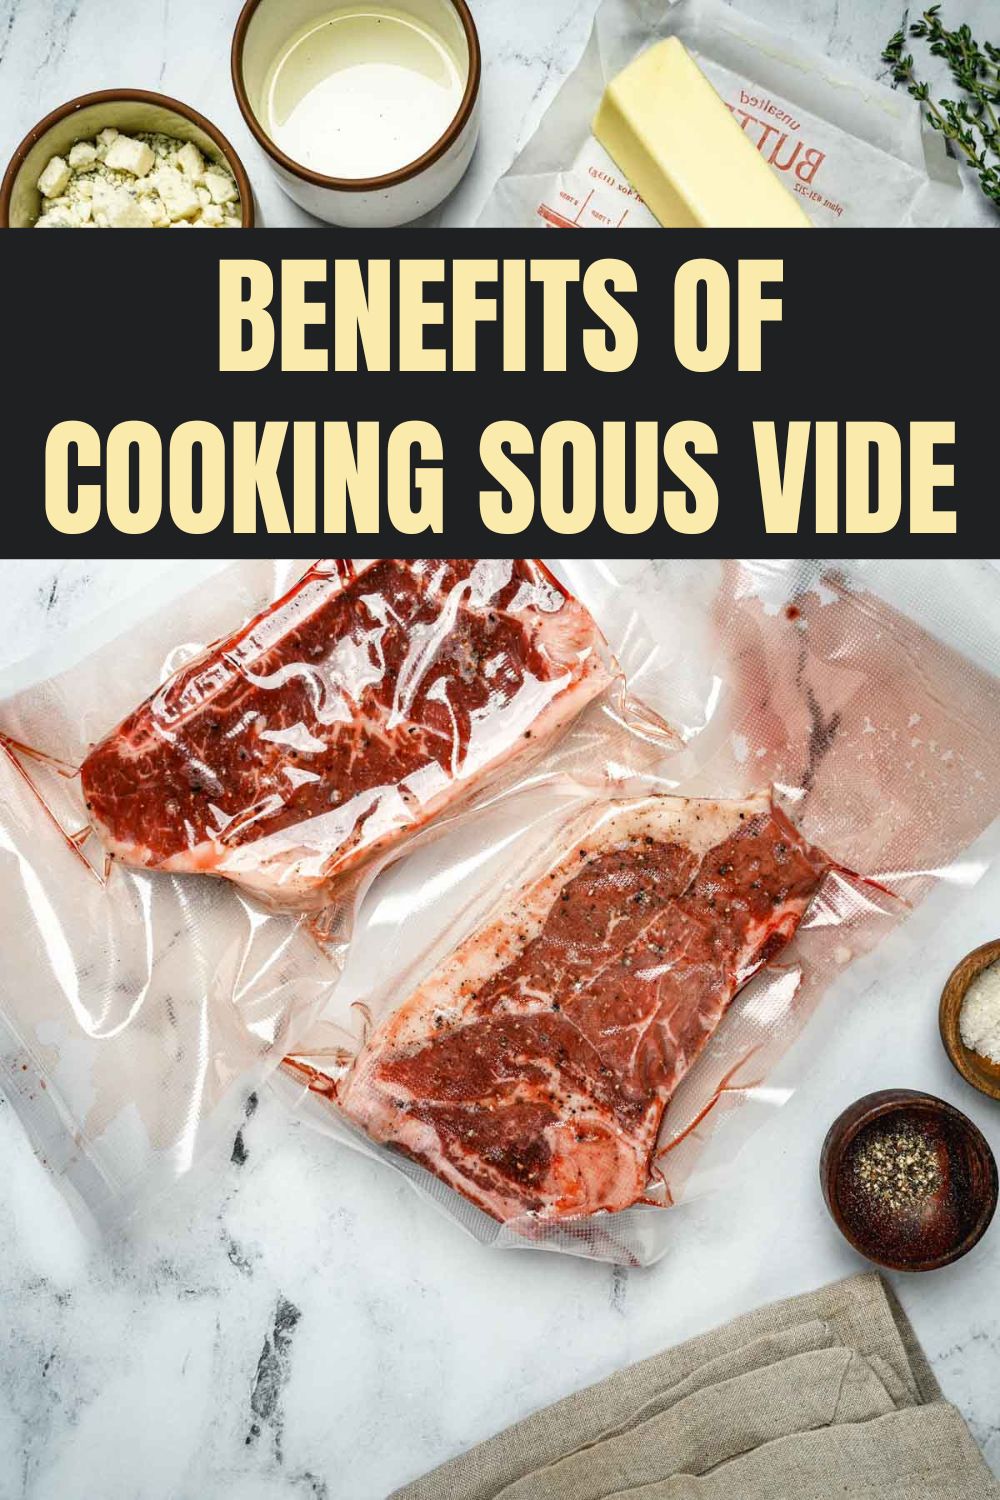 The Benefits of Sous Vide Cooking